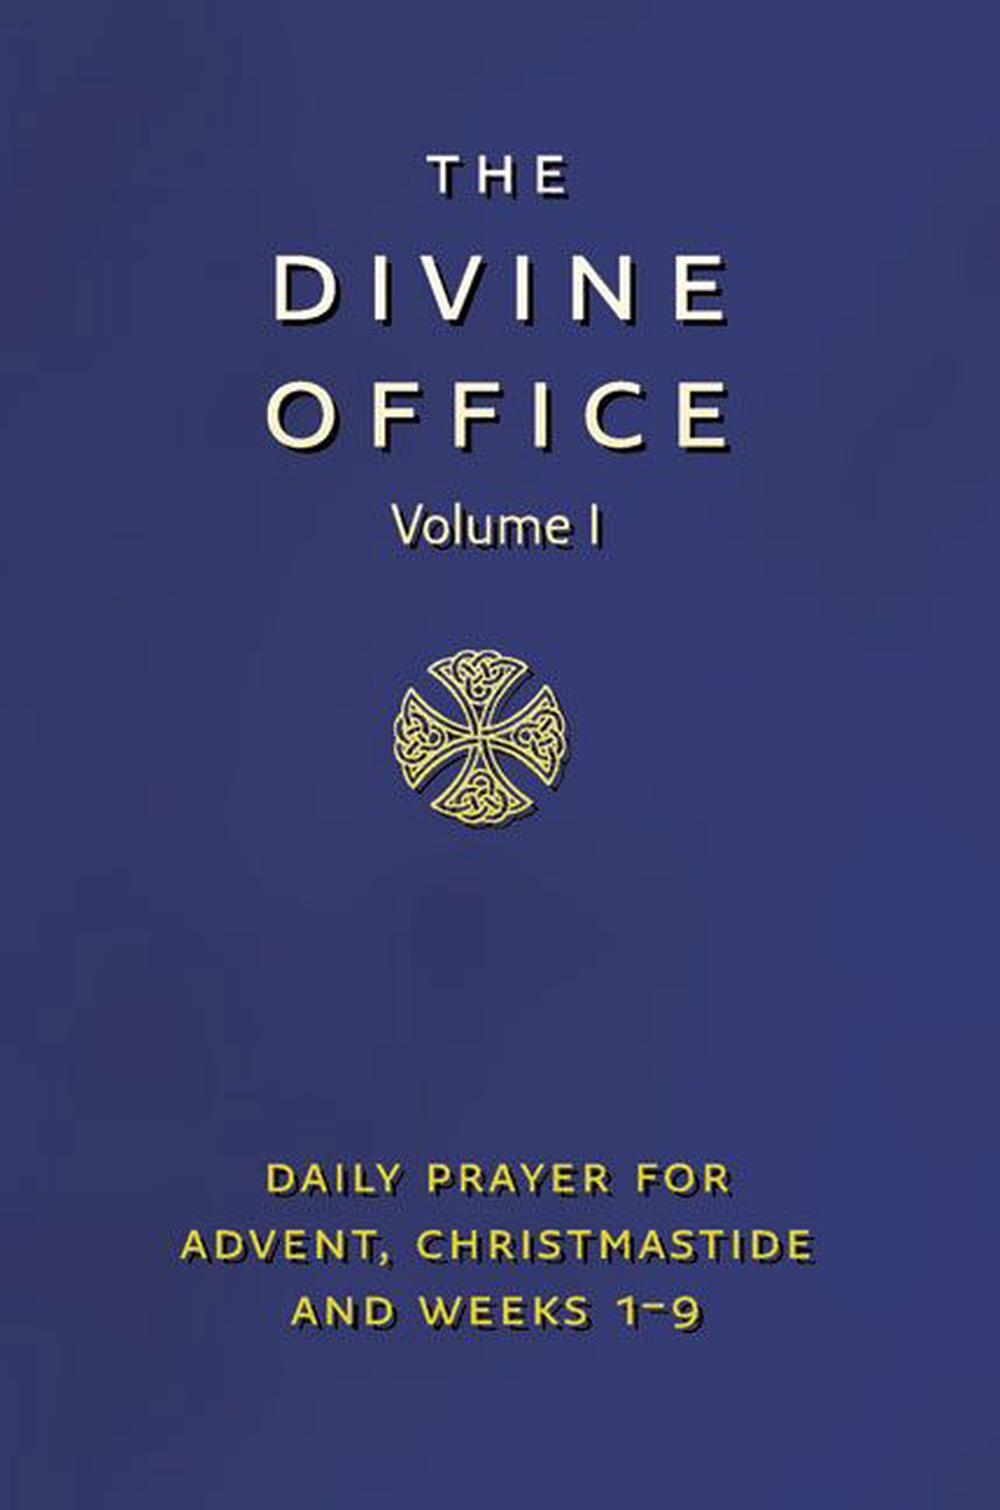 hymns book for divine office